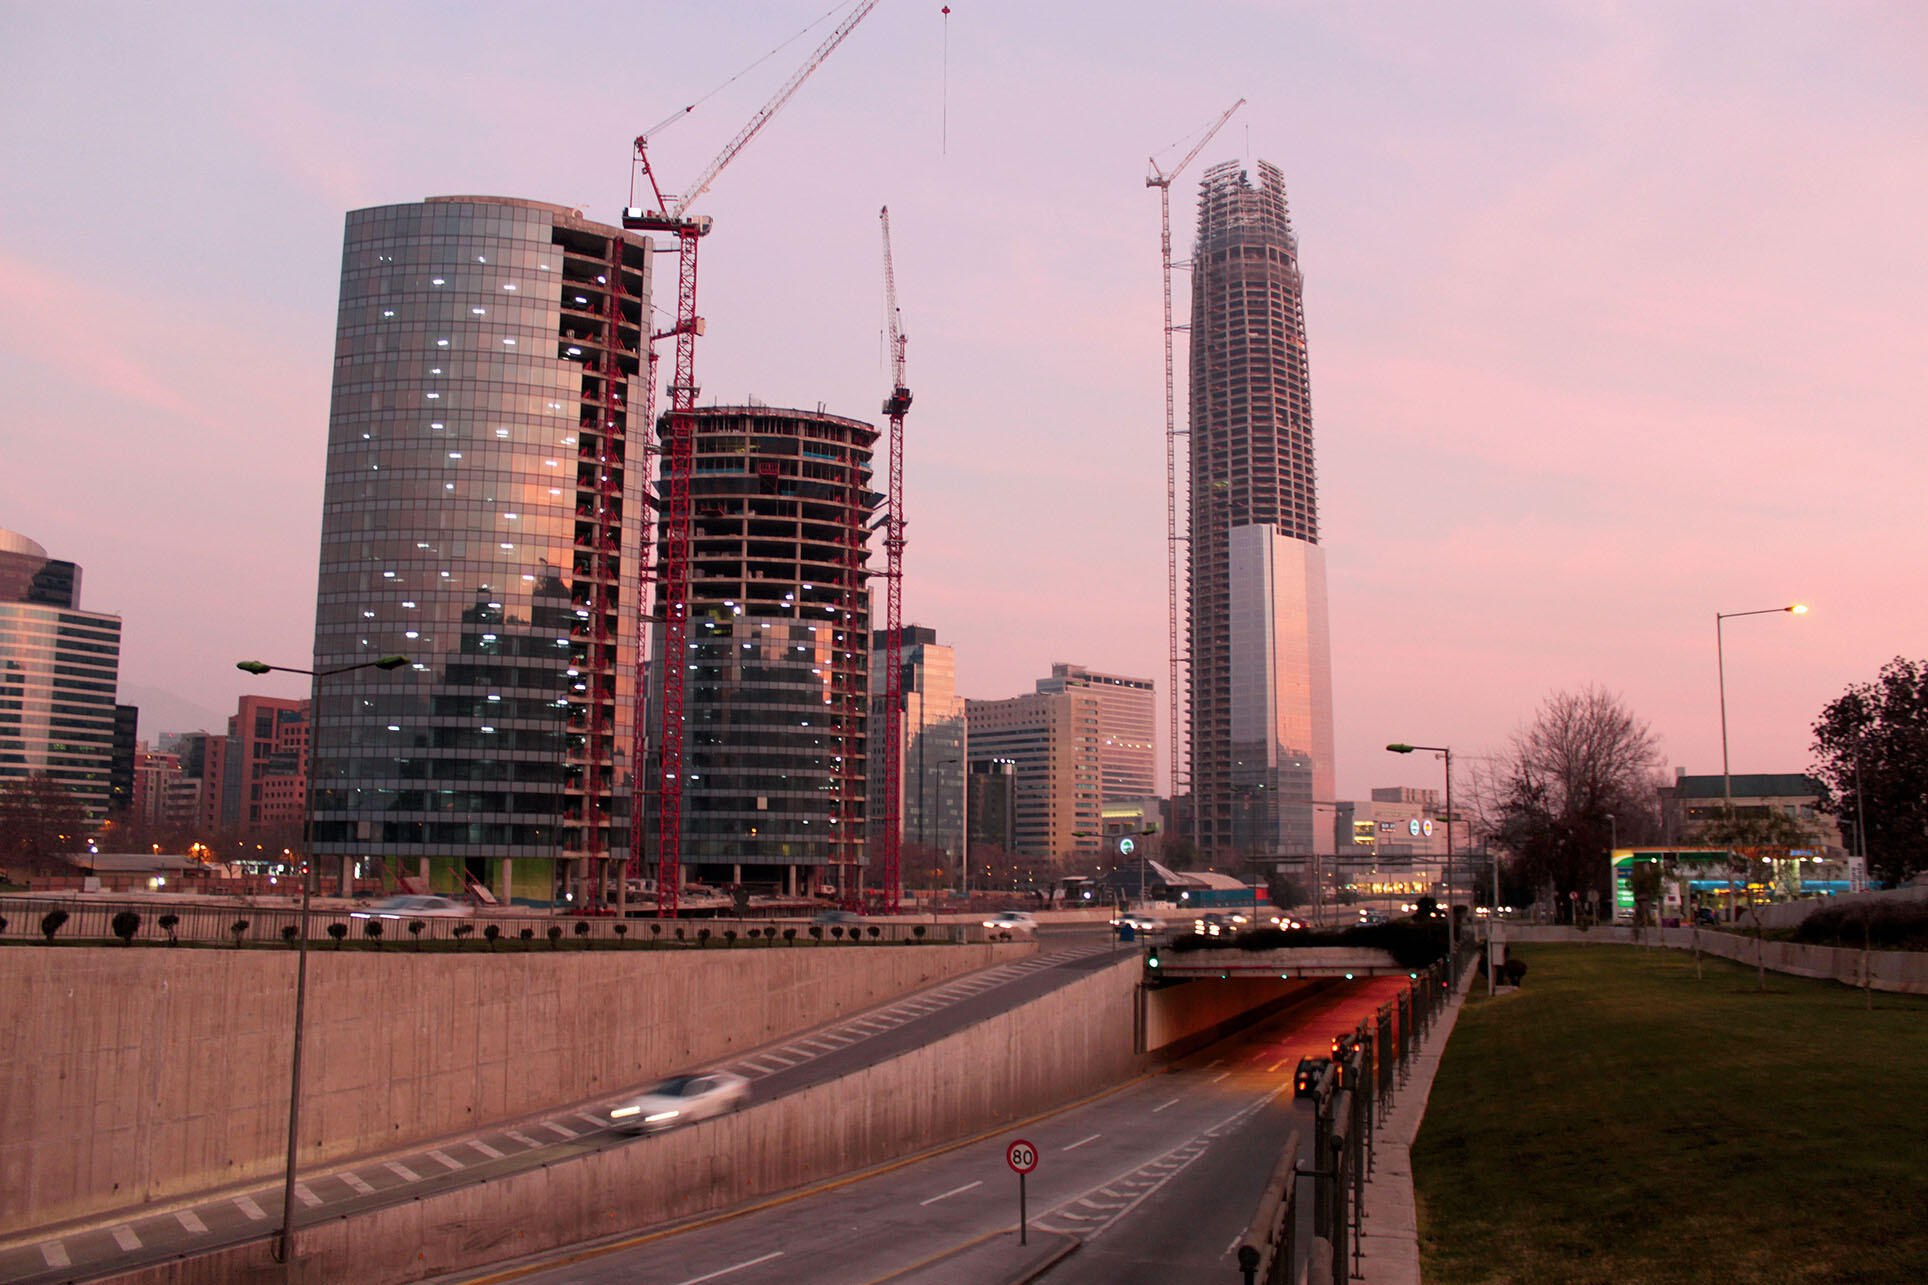 The large skyscrapers of the Costanera Center, pictured against the Santiago skyline, are emblematic of Chile's economic success. (Photo by Felipe Araya Allende.)